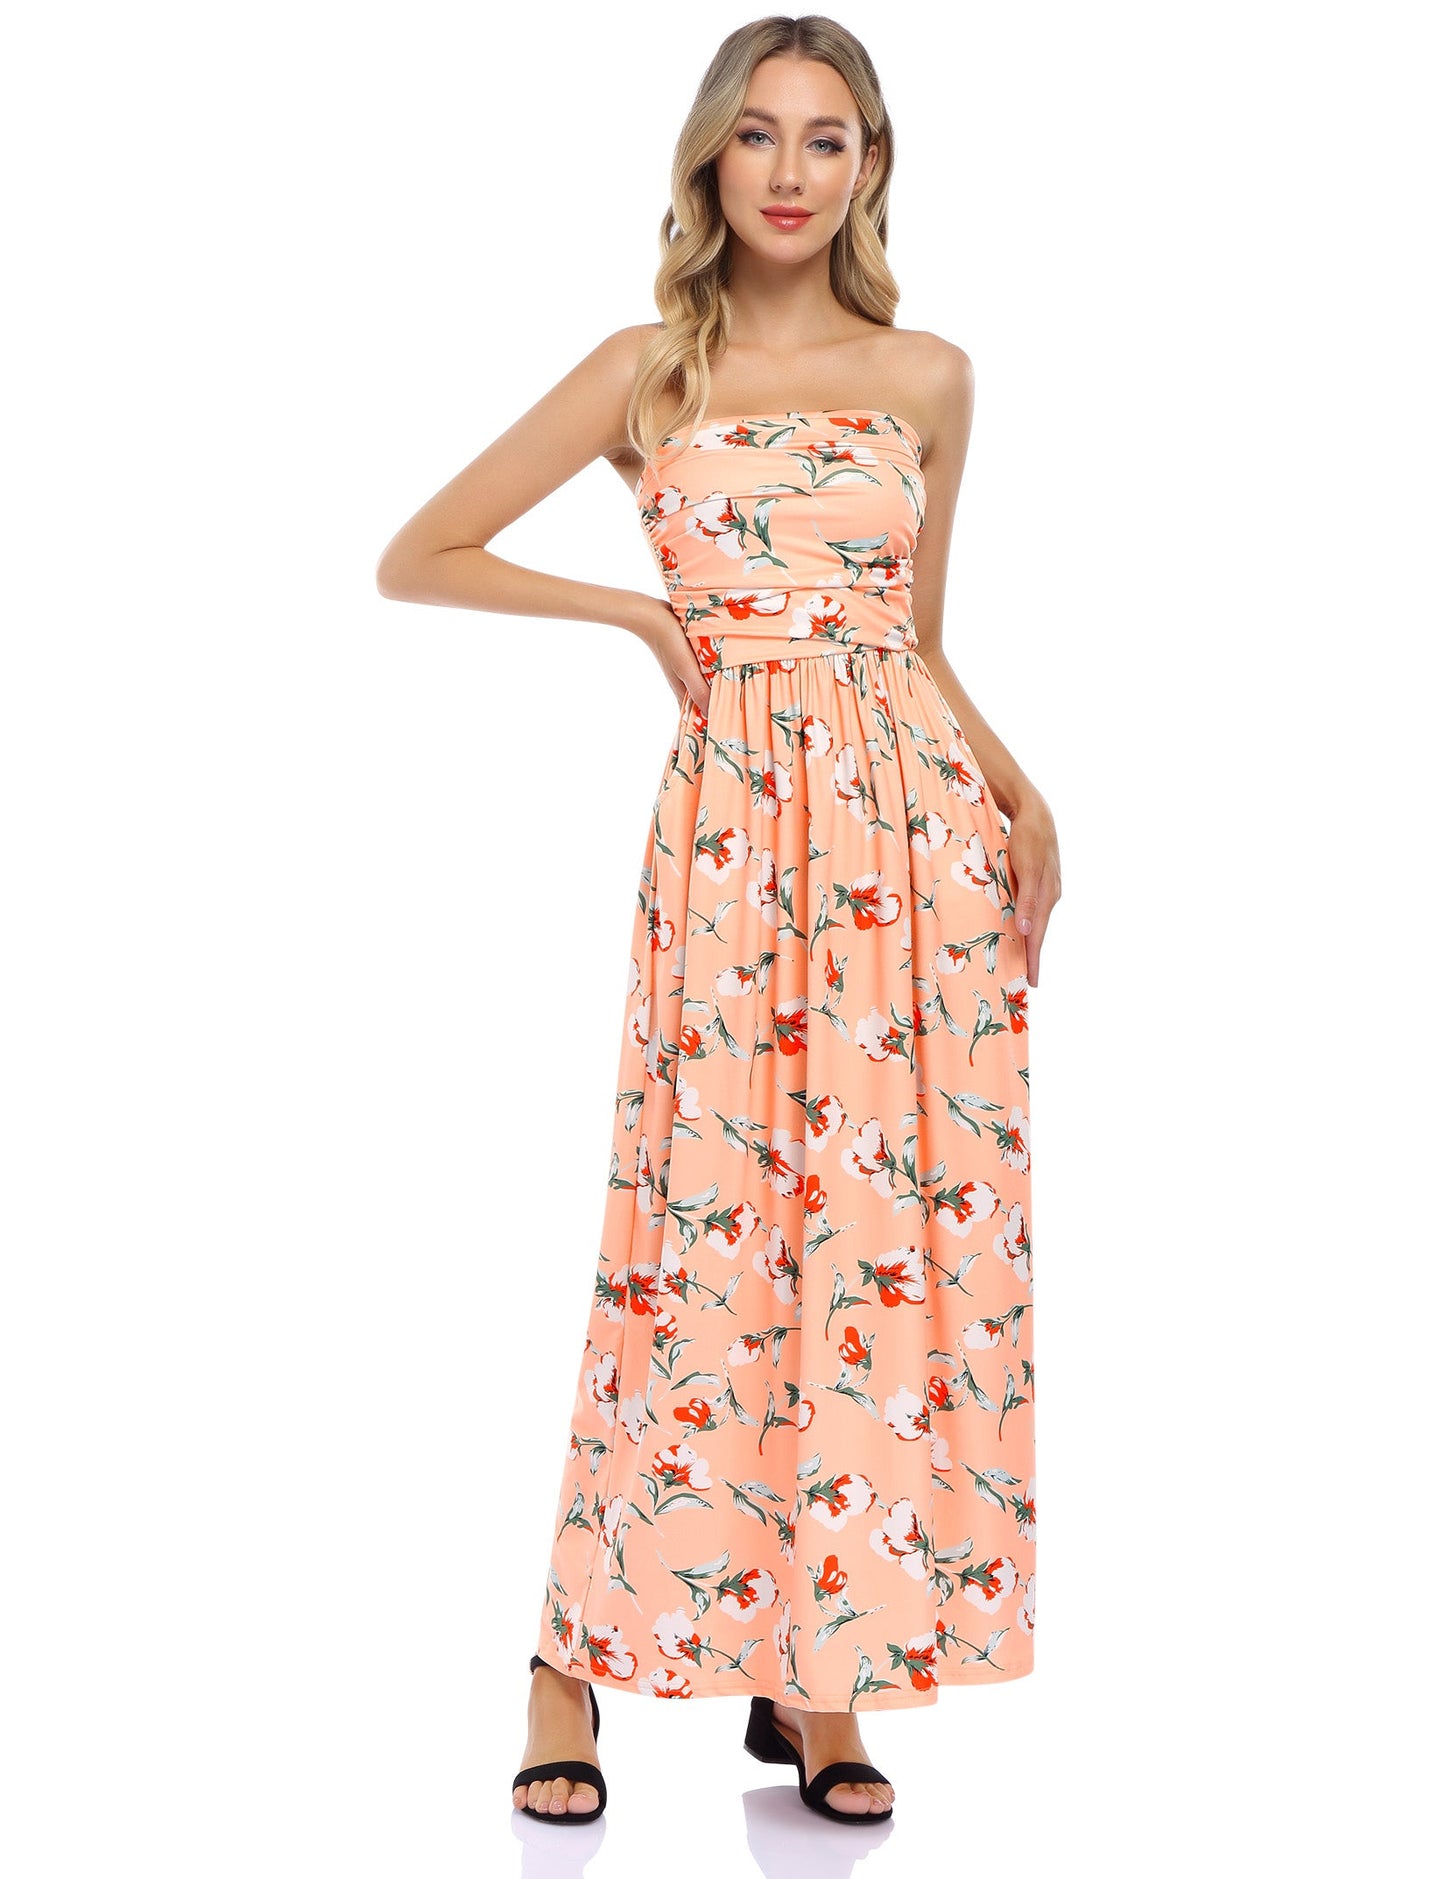 YESFASHION Women's Strapless Graceful Floral Party Maxi Long Dress Orange Pink